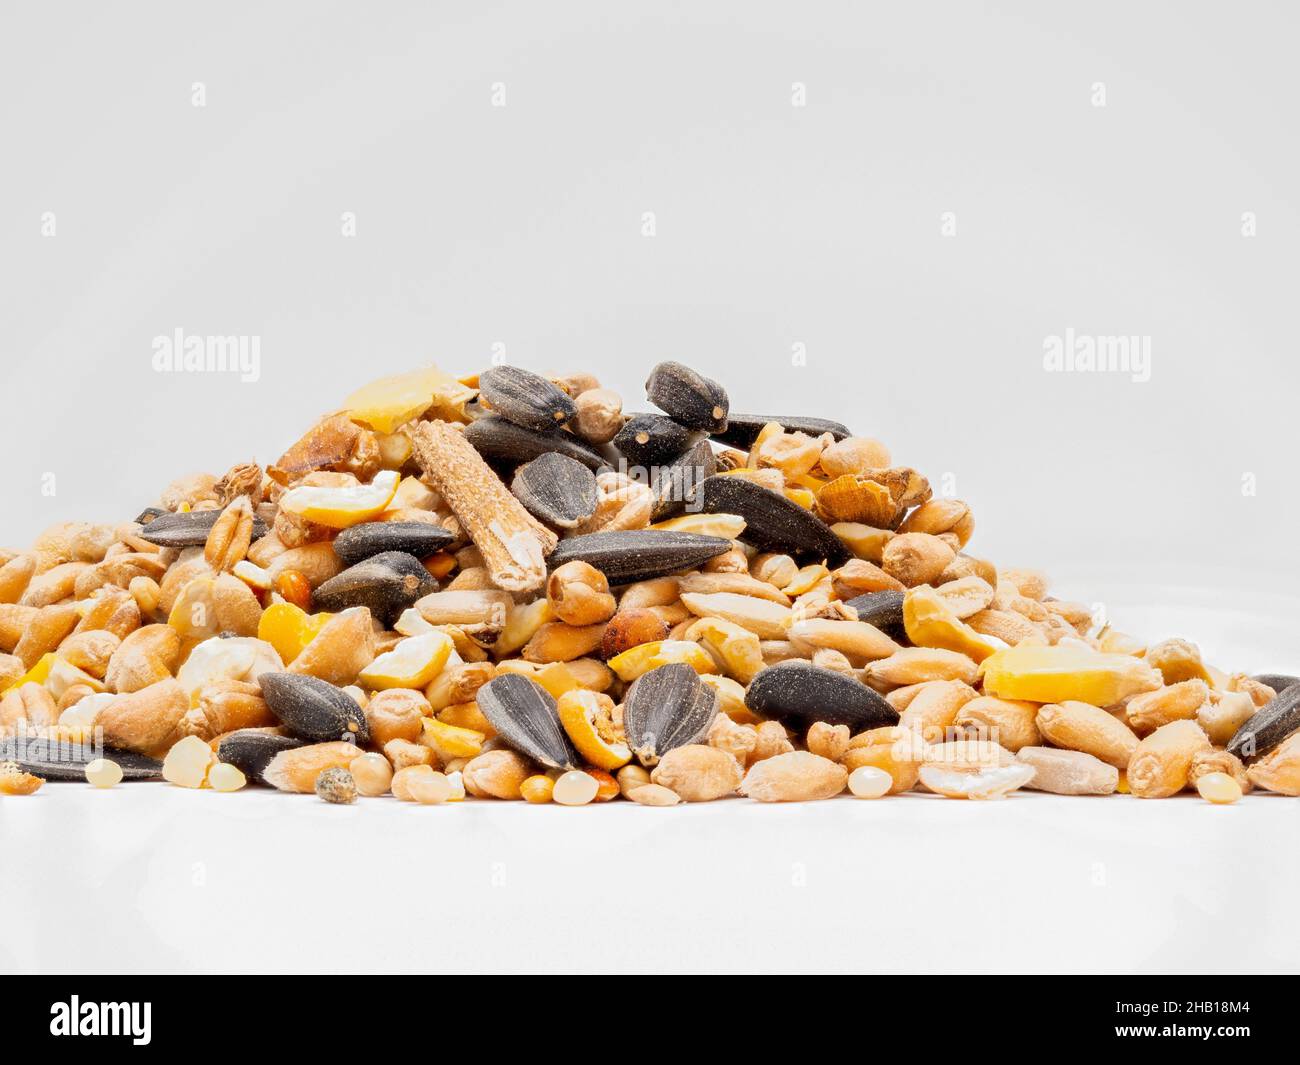 Natural winter food selection of natural seeds, nuts and pulses to refill feeders for wild birds Stock Photo